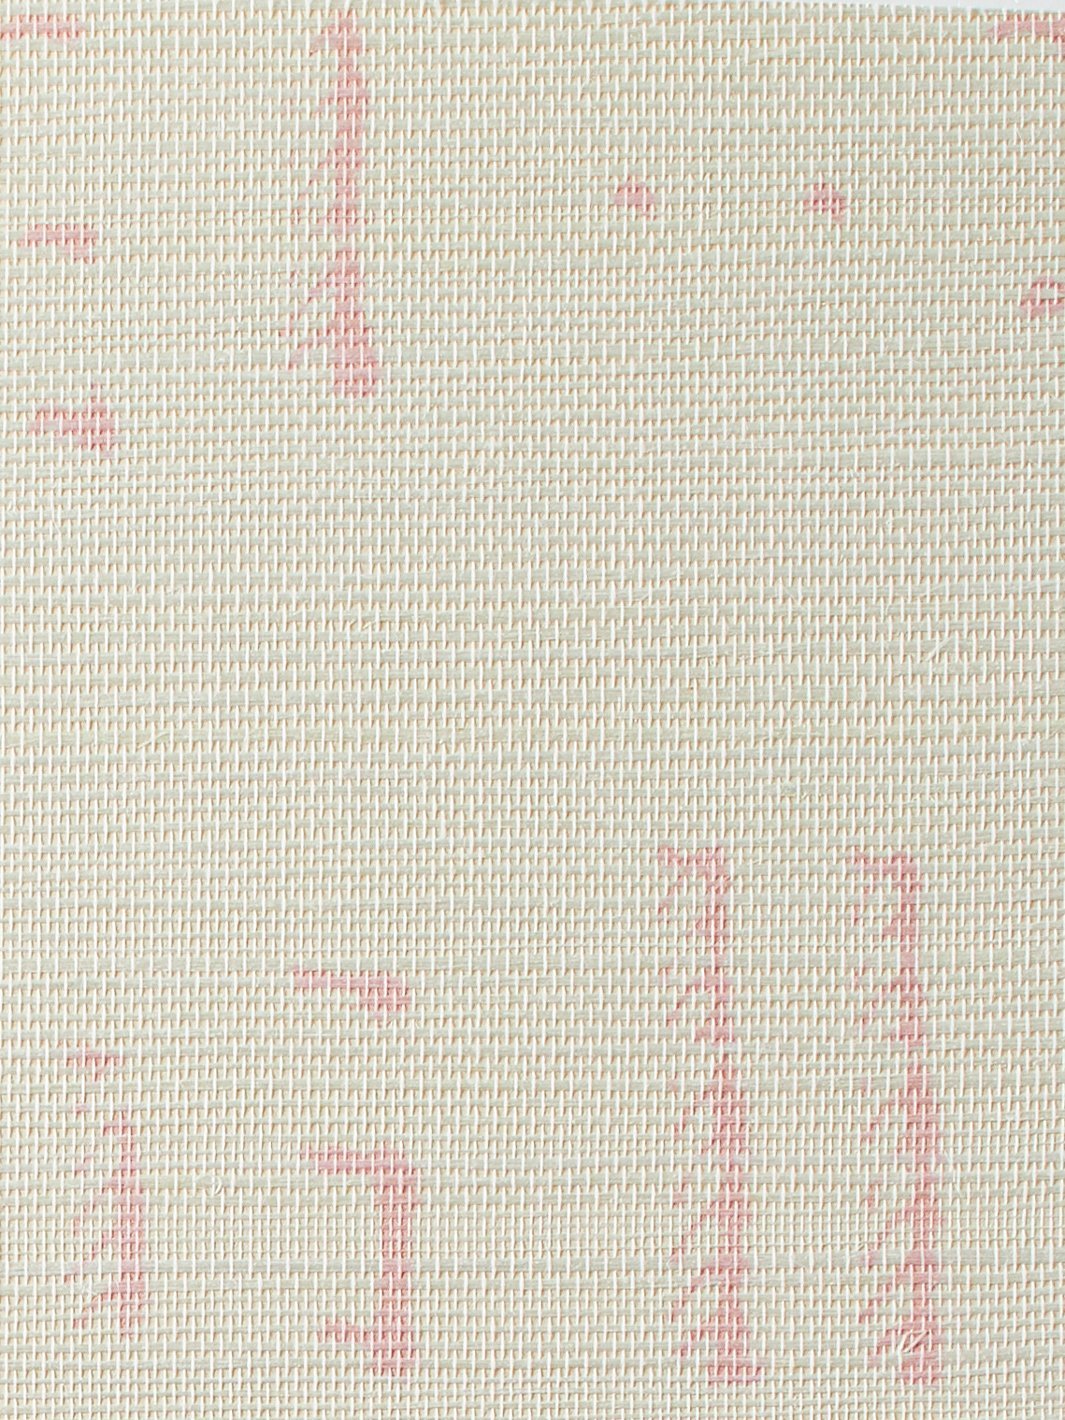 'Stitch' Grasscloth' Wallpaper by Nathan Turner - Pink